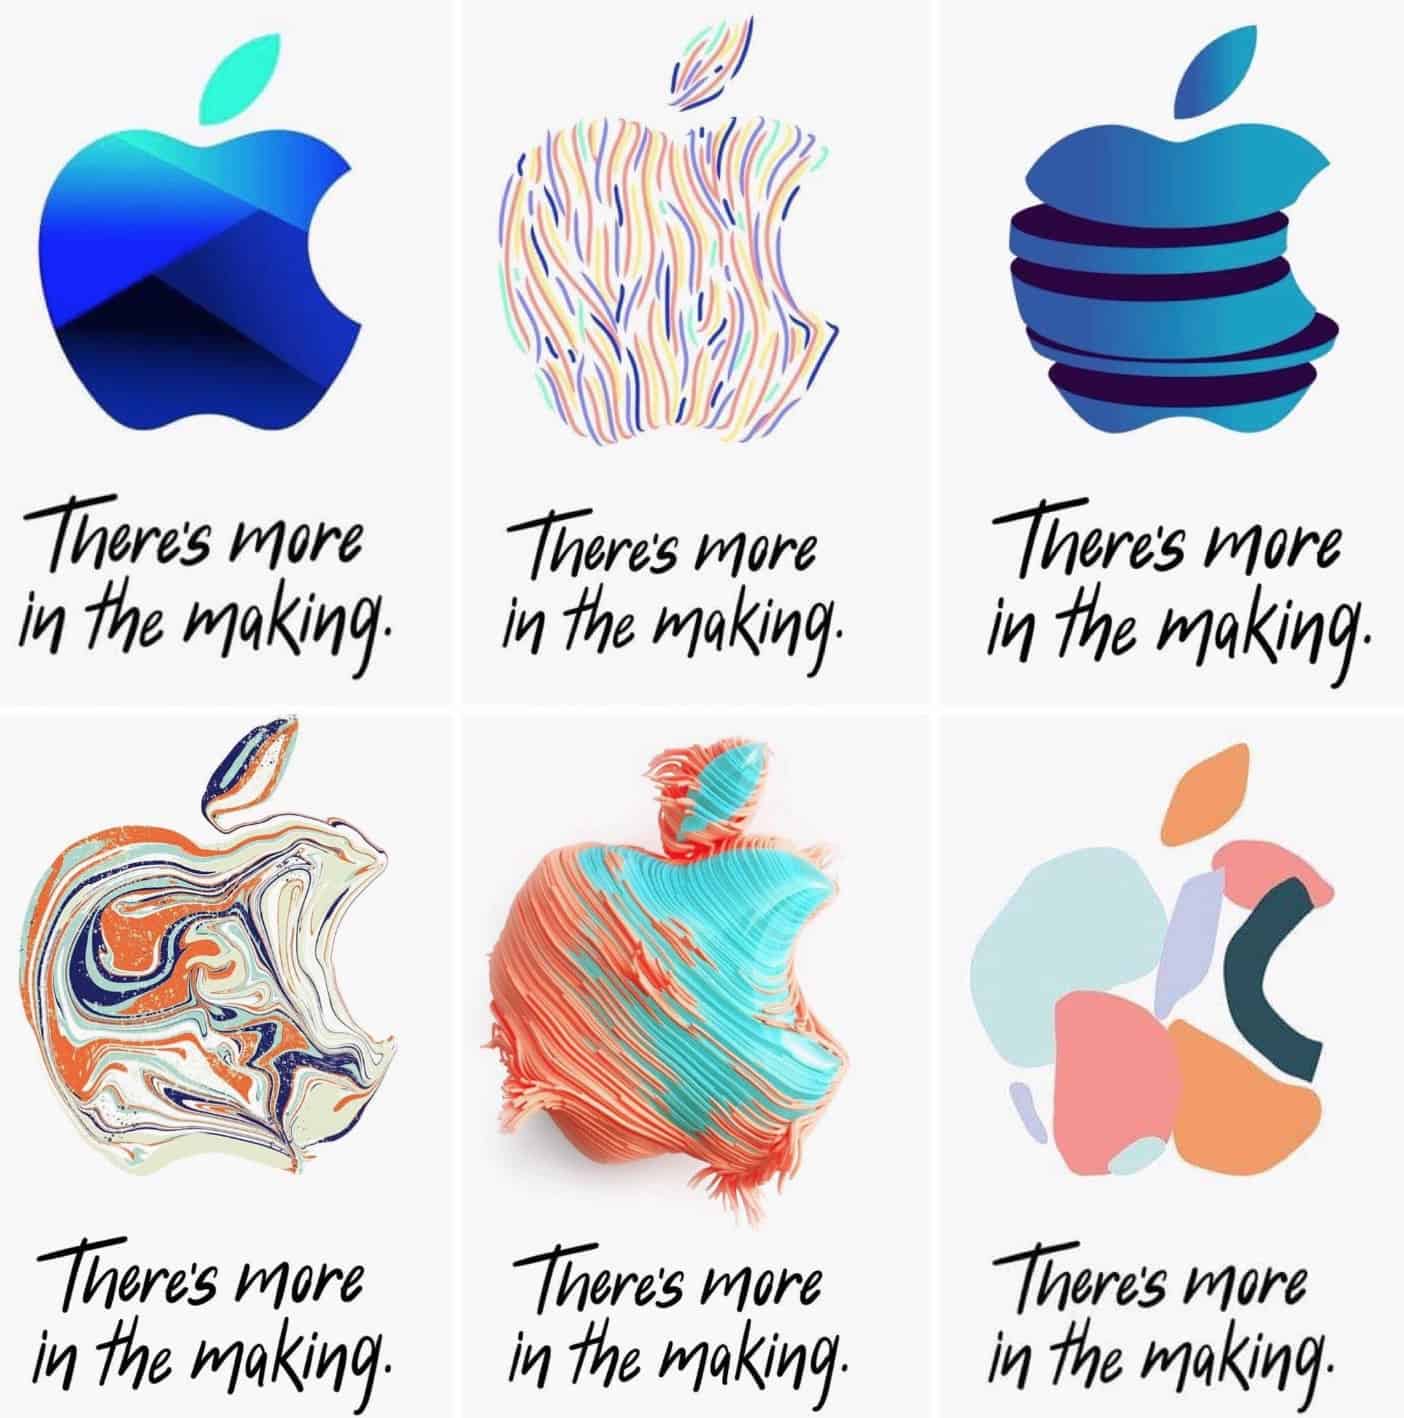 Apple's Logo - Apple logo goes into redesign overload ahead of October event | Cult ...